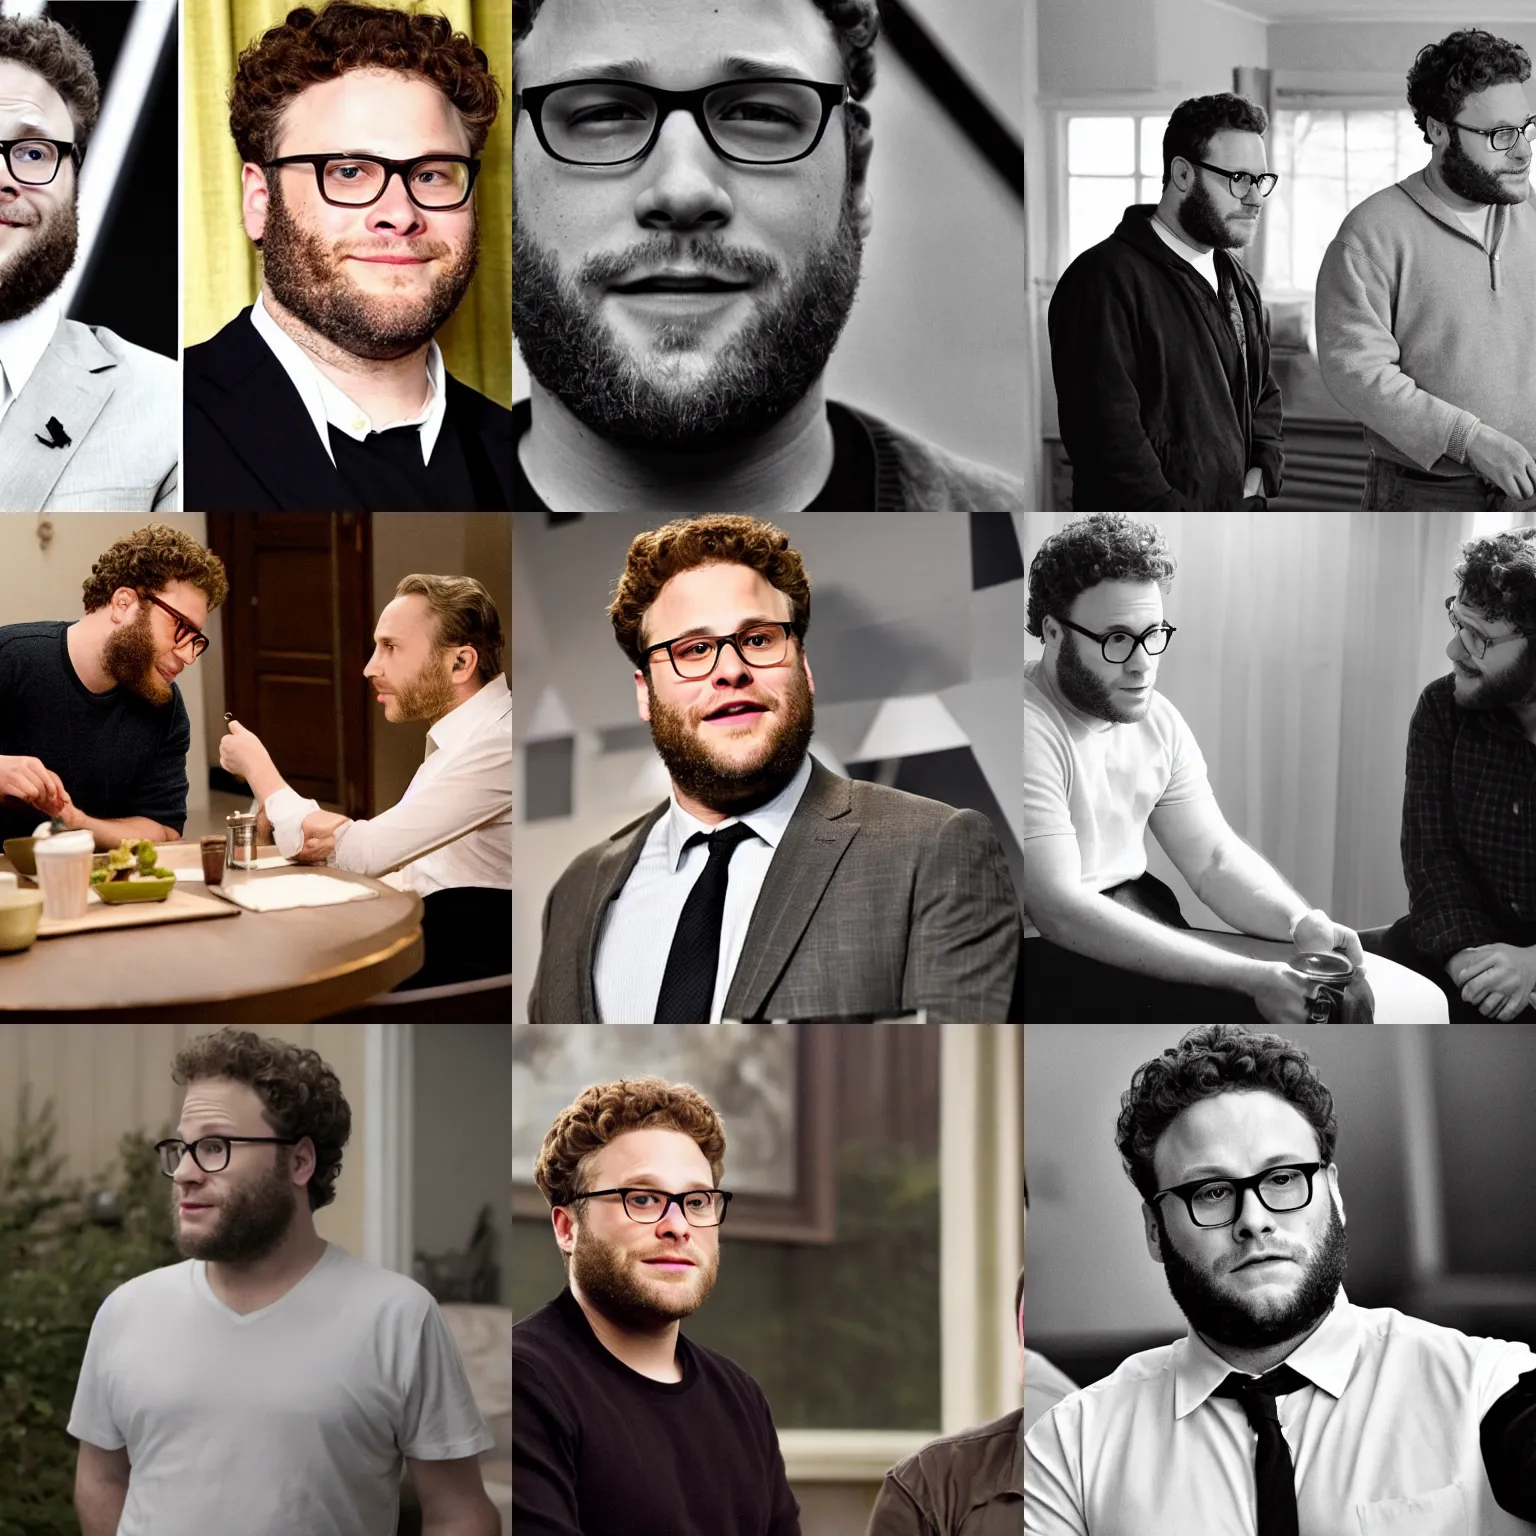 Prompt: seth rogen directing an ingmar bergman - style psychological drama, the whole life - cycle of his project